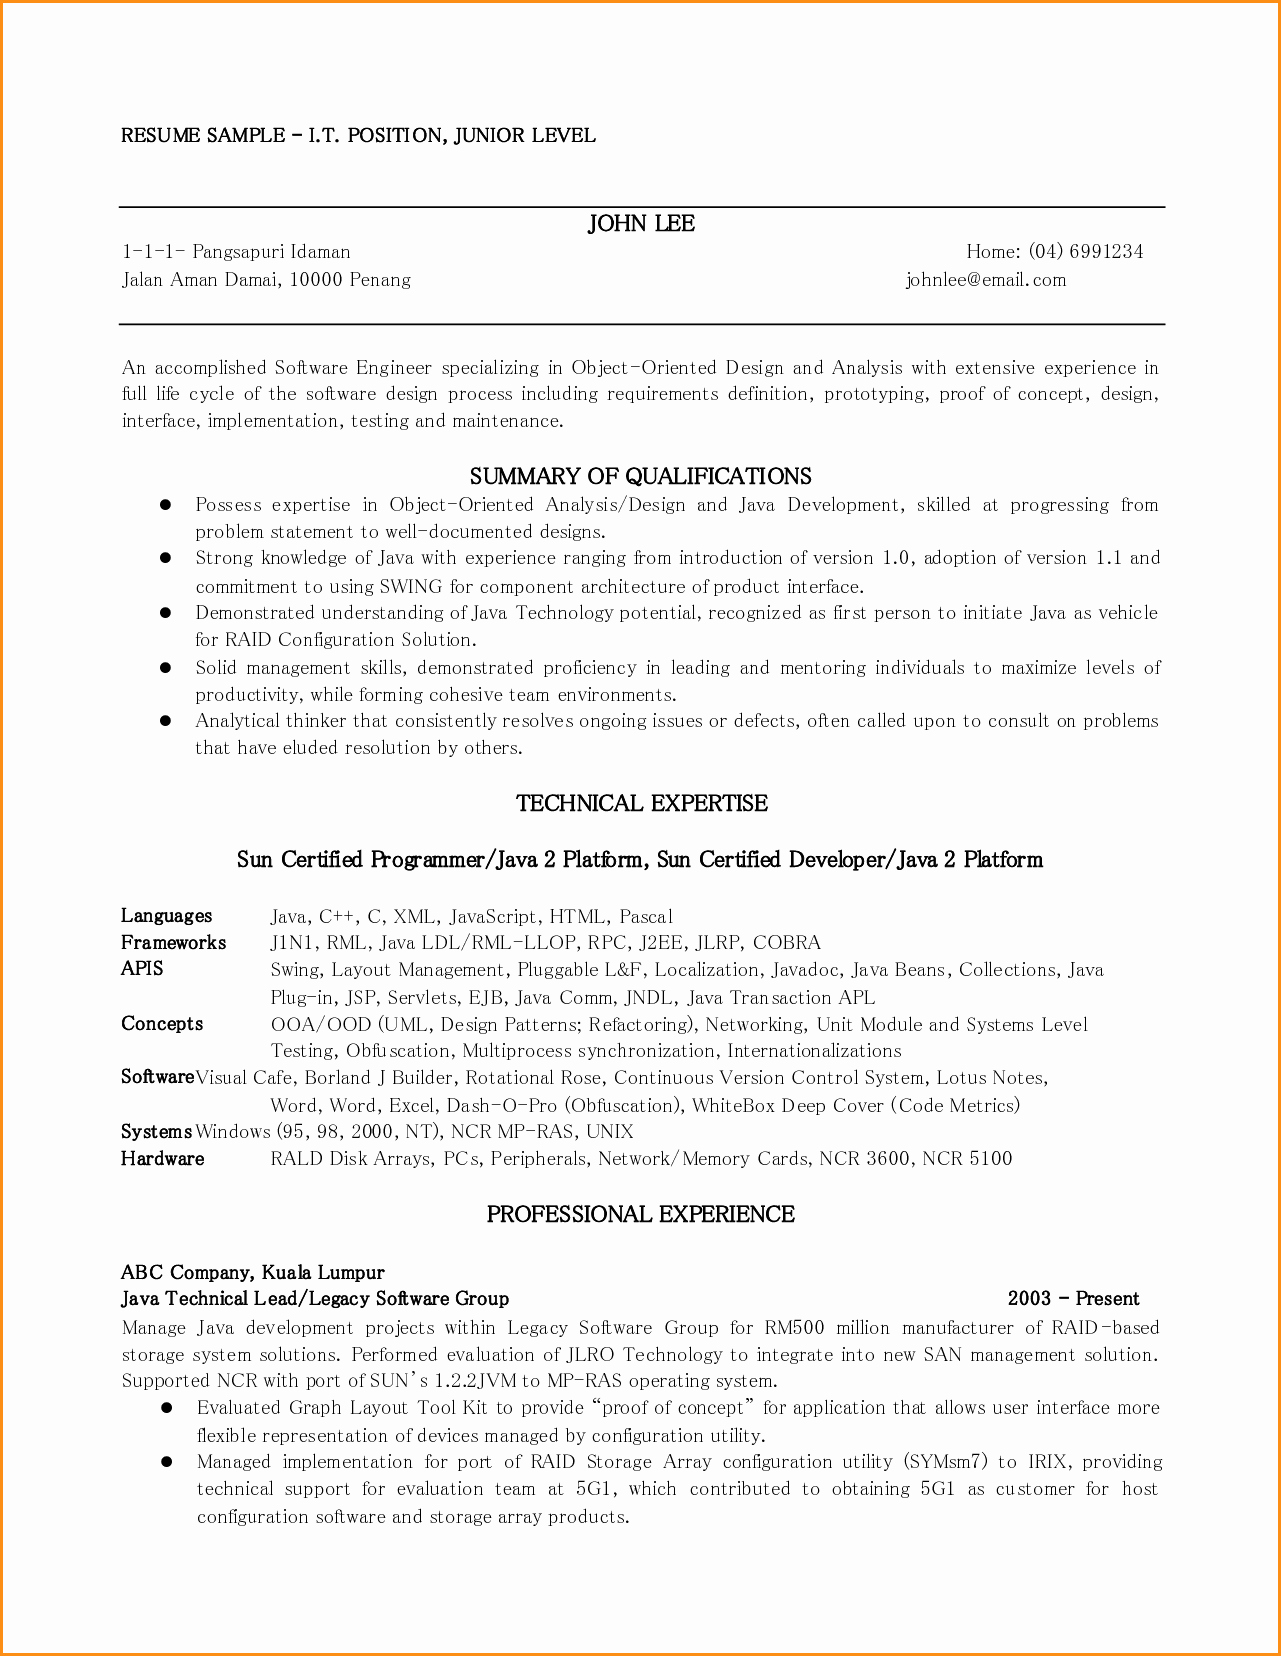 7 Good Resume Examples for First Job